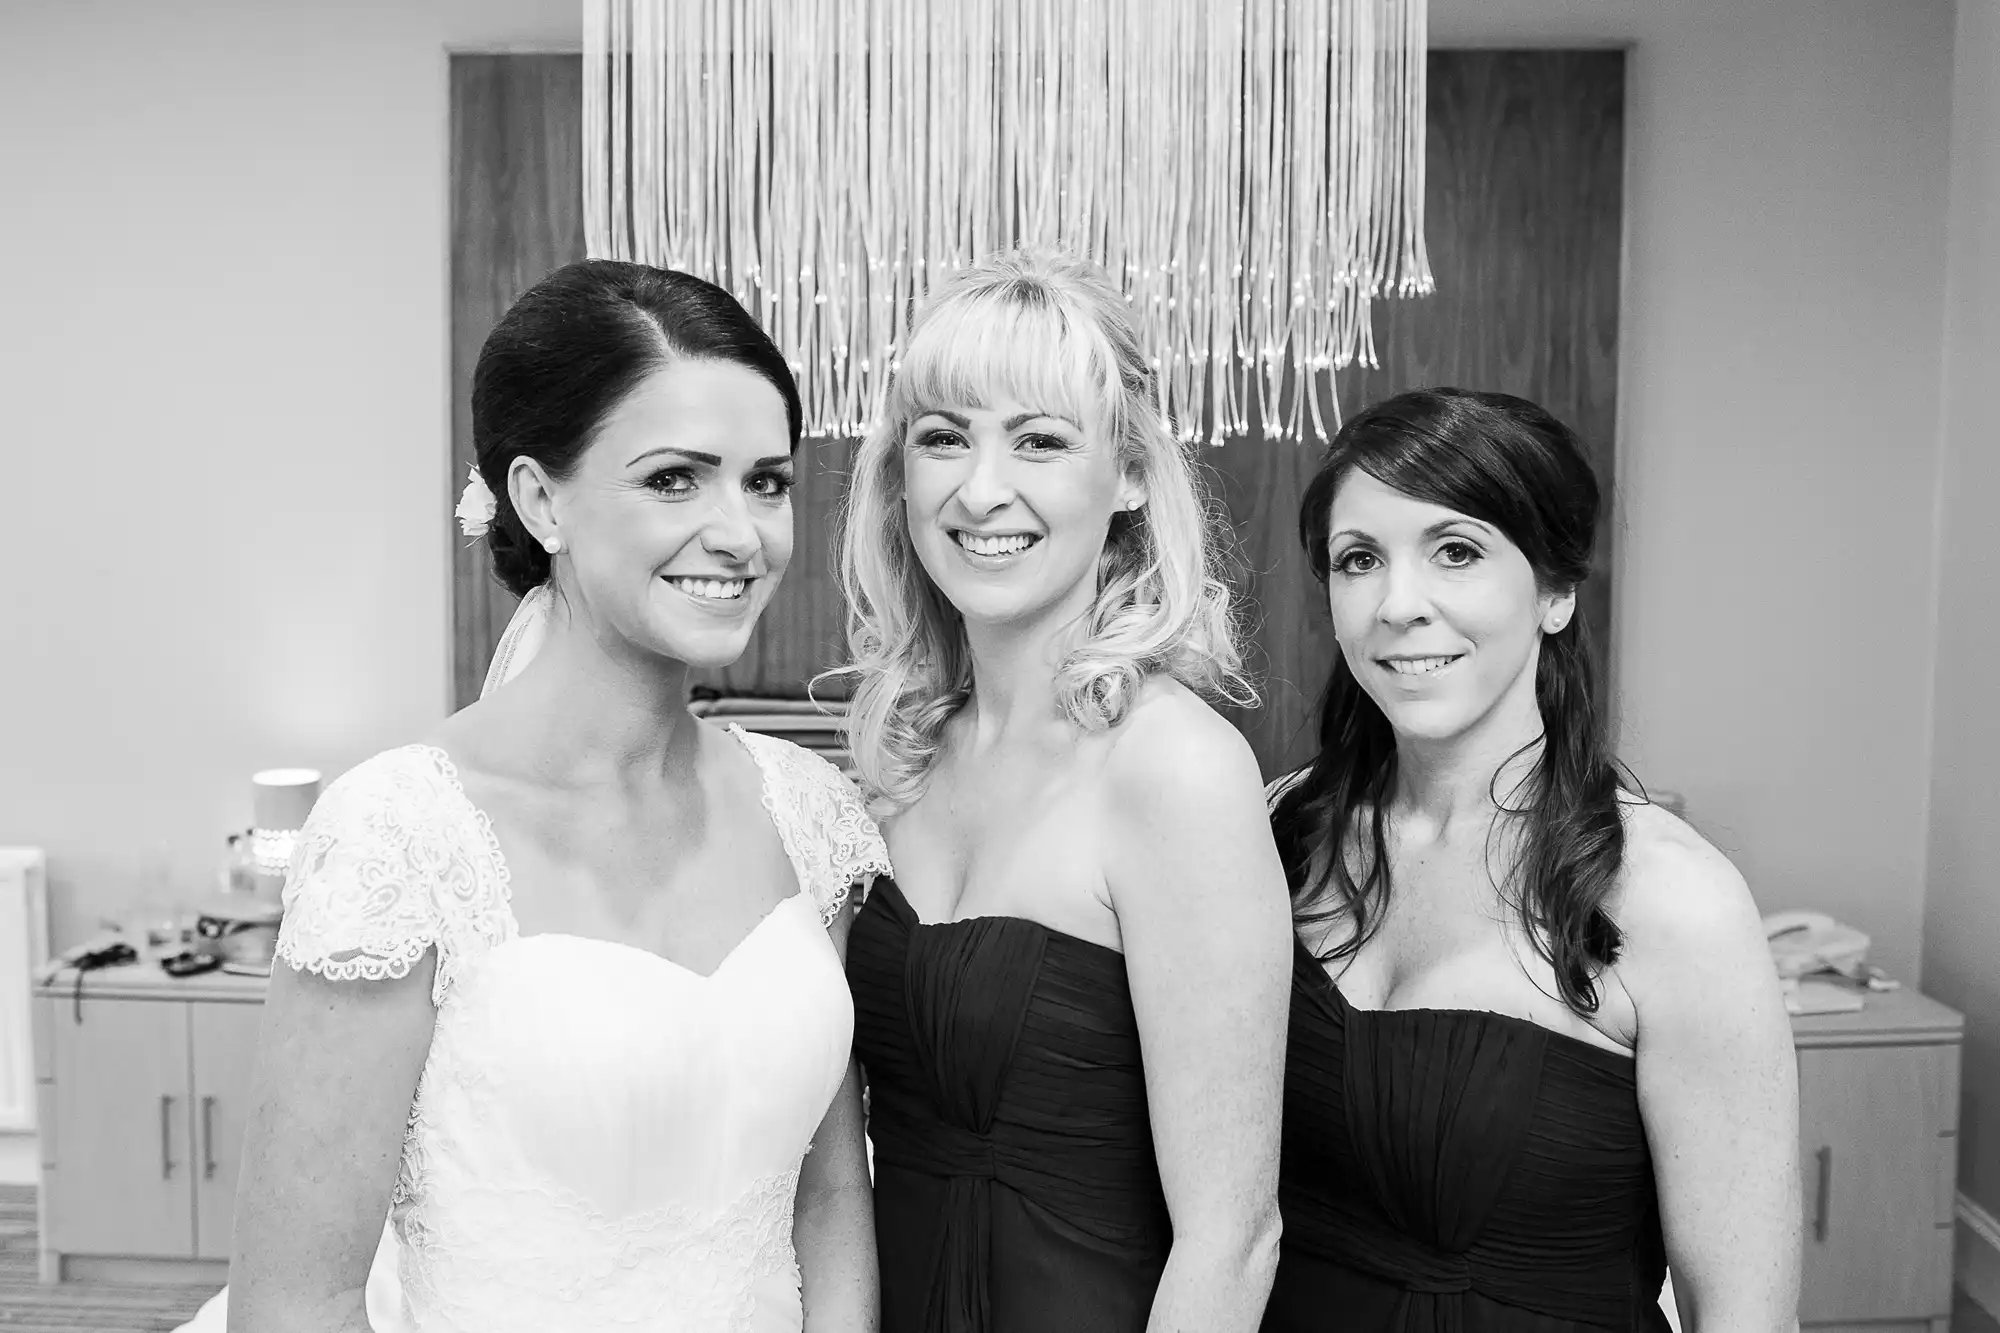 Three women dressed for a special occasion, posing together smiling; one in a white bridal gown, two in black dresses, in a room with a modern chandelier.